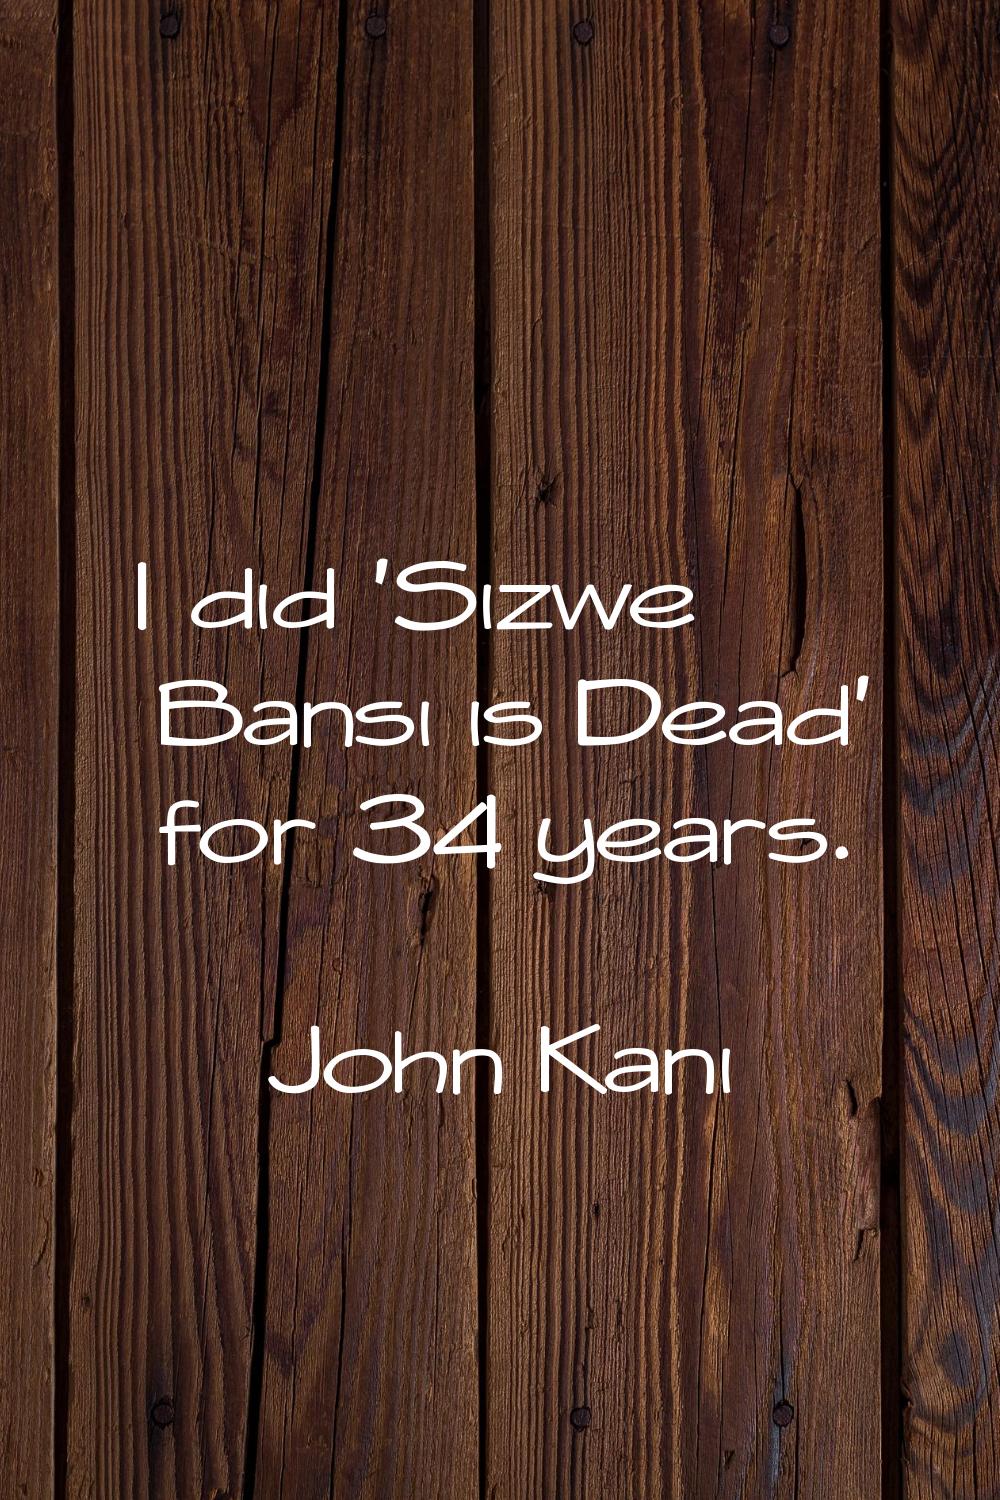 I did 'Sizwe Bansi is Dead' for 34 years.